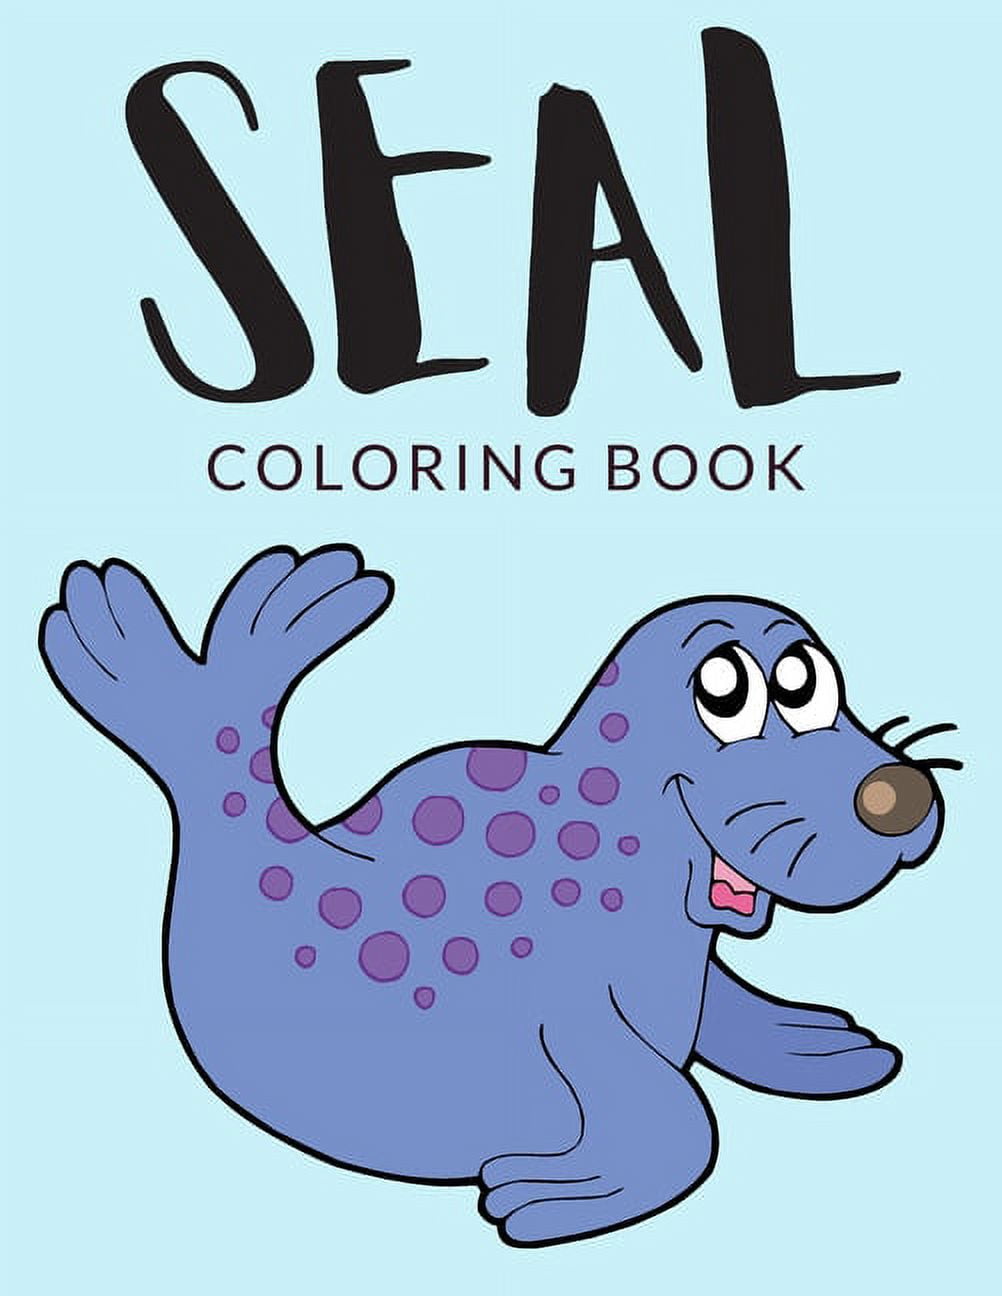 Seal Coloring: Seal Coloring Book : Seal Coloring Pages For Preschoolers,  Over 30 Pages to Color, Perfect Seals Animals Coloring Books for boys